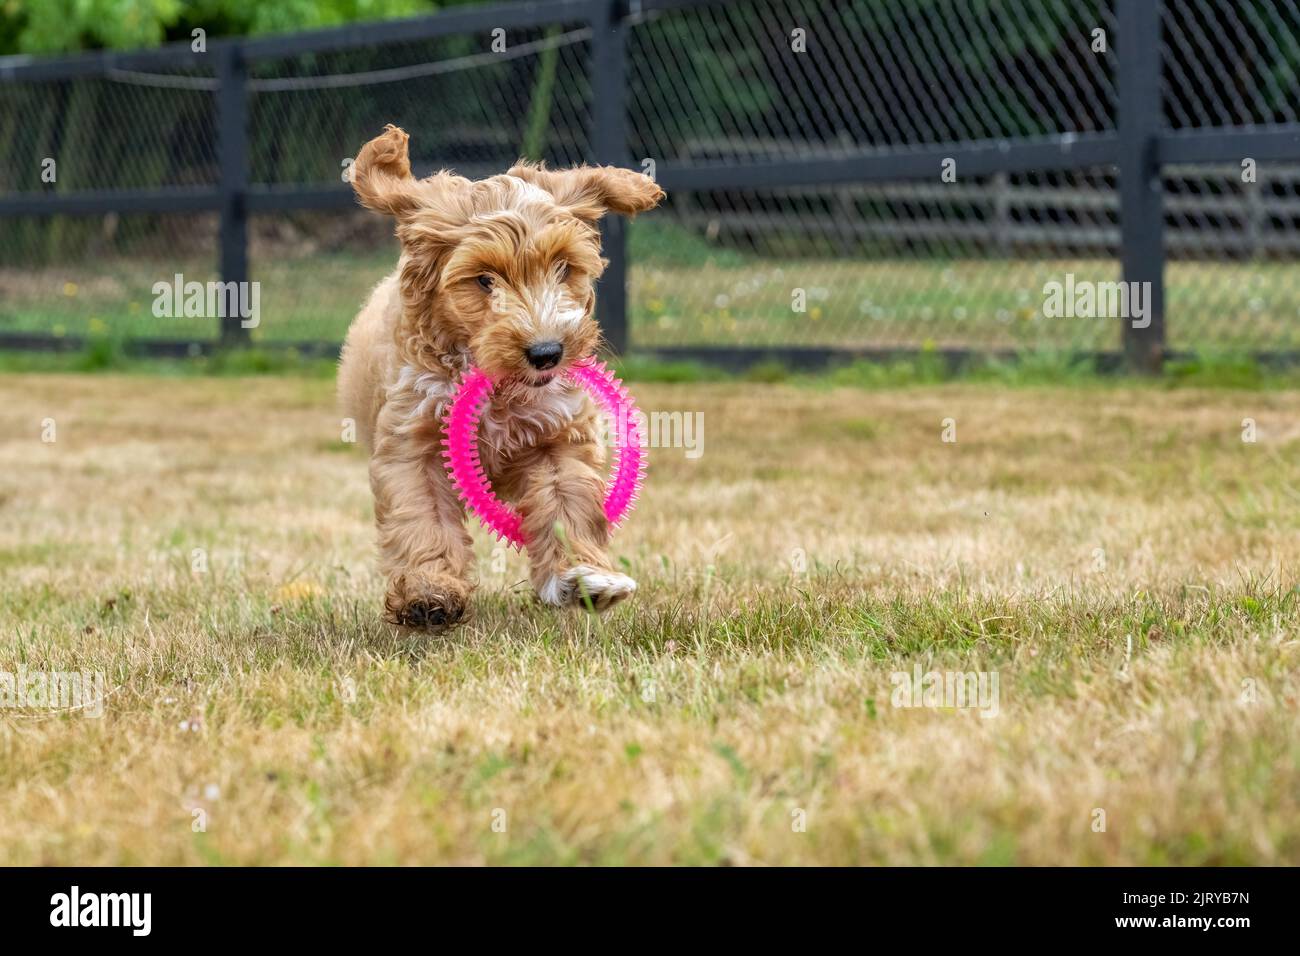 Issaquah, Washington, USA.  3-month old Aussiedoodle puppy named 'Bella' tripping on a pink plastic ring she was carrying.  (PR) Stock Photo